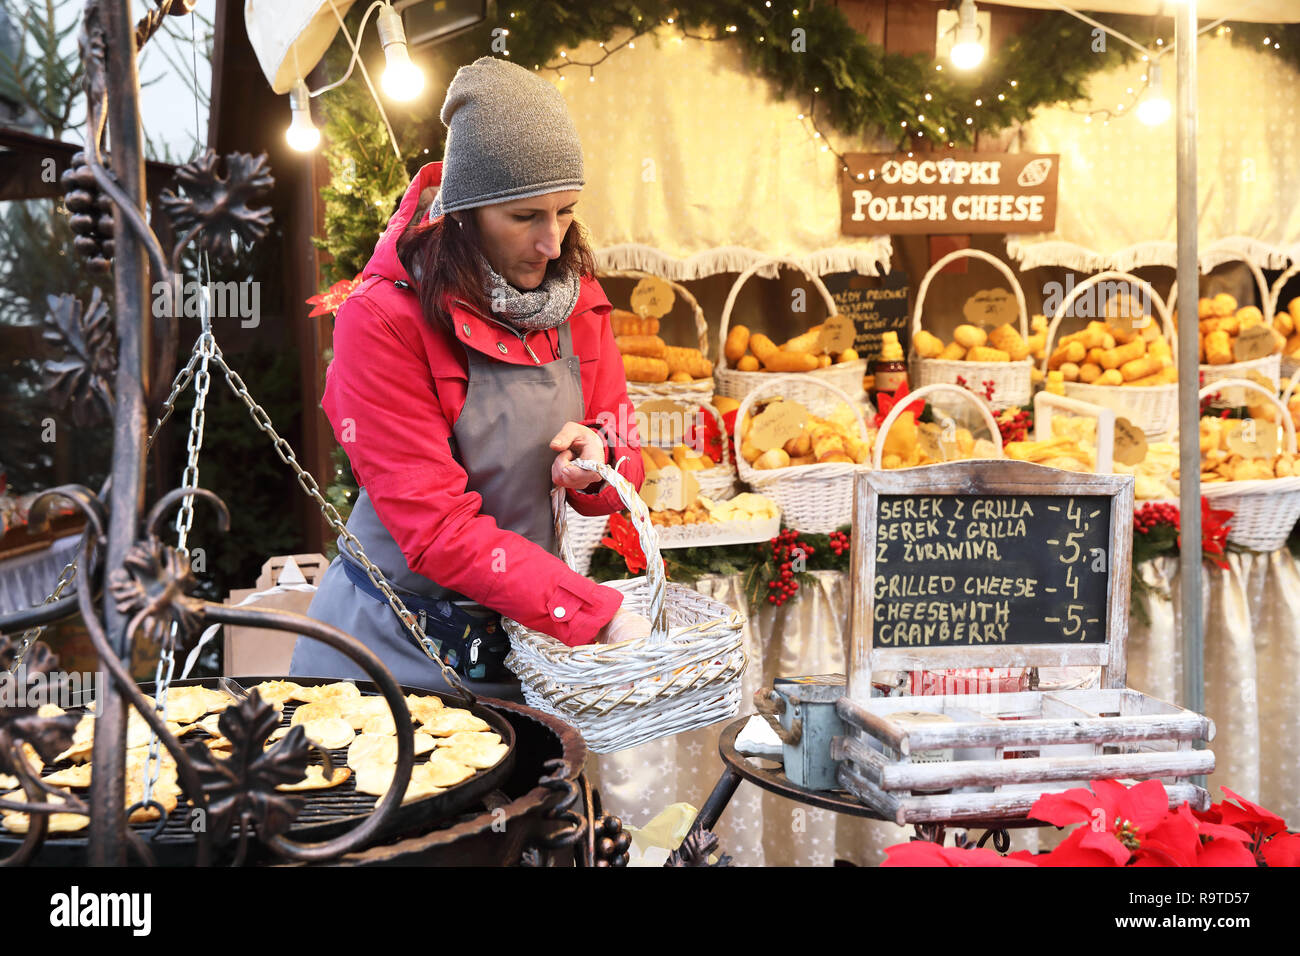 Smoked cheese stall on the Christmas market in the Main Market Square, in the Old Town in Krakow, Poland Stock Photo